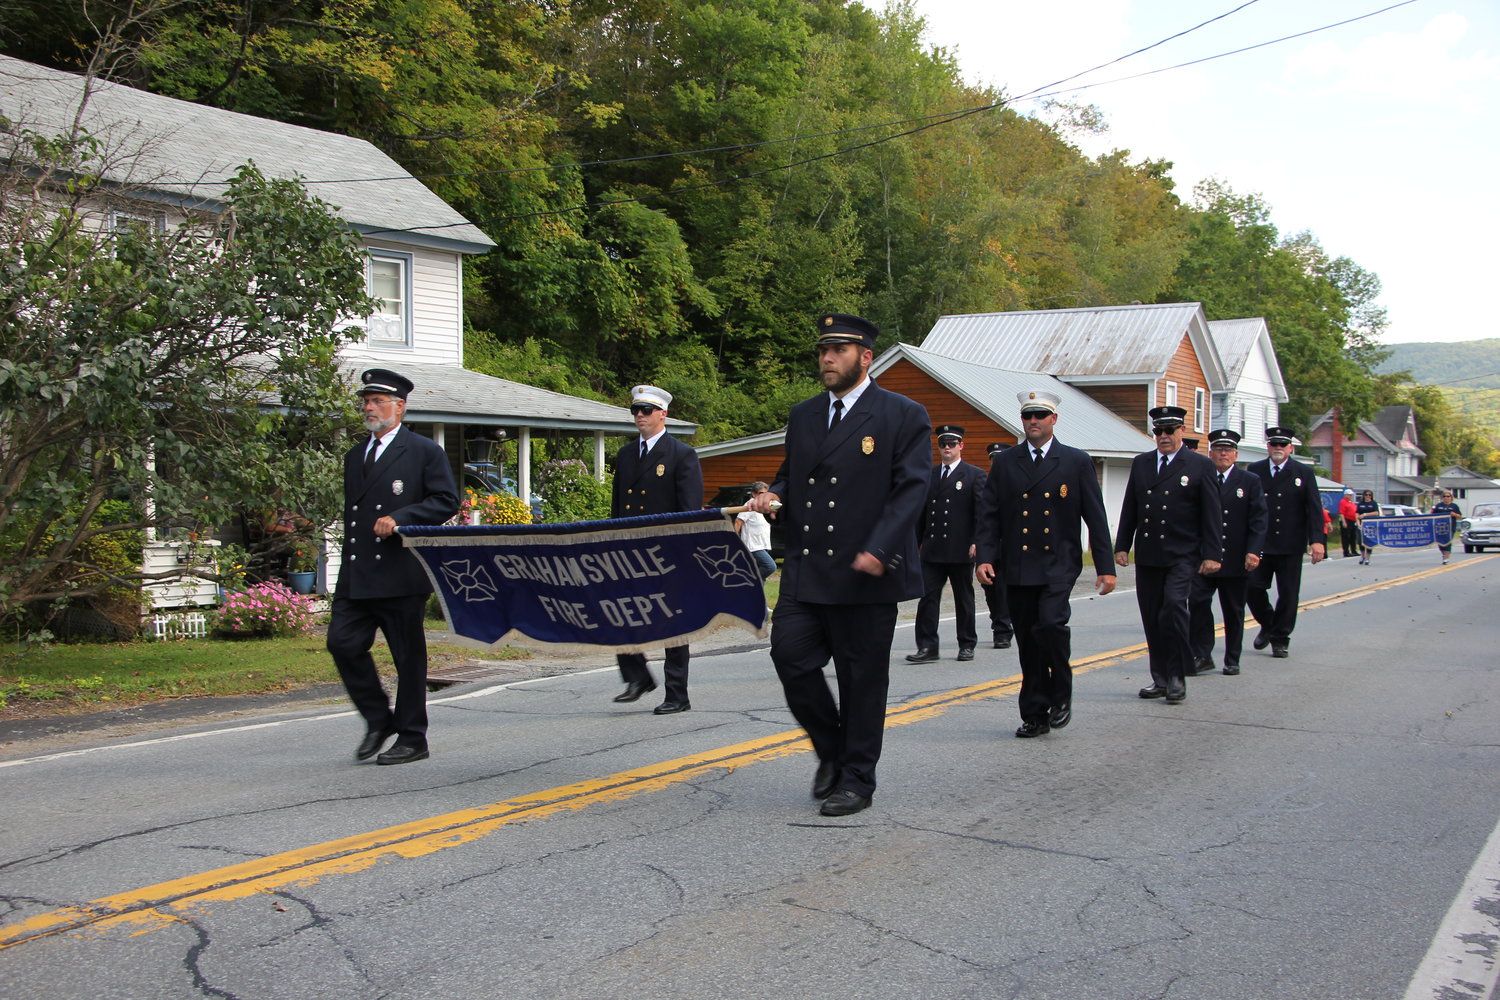 What better way for the Grahamsville Fire Department to celebrate your 75th anniversary than with a parade.